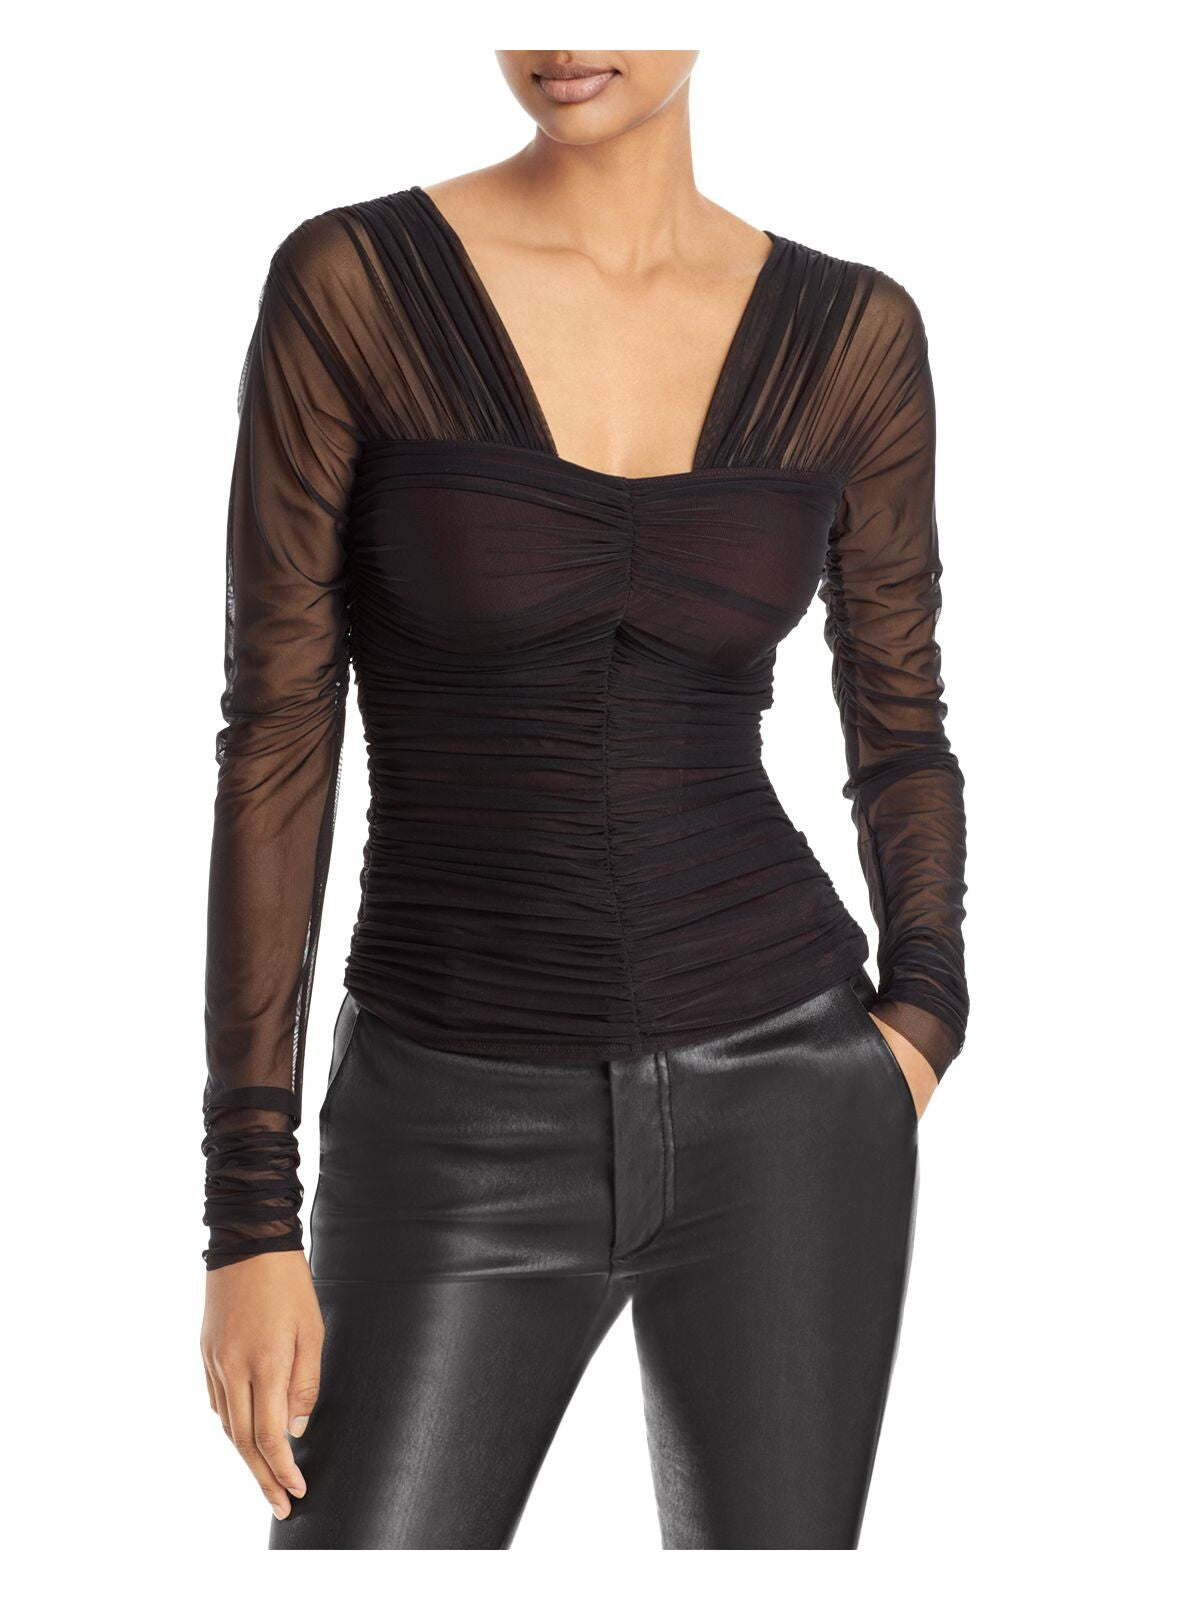 A.L.C Womens Black Mesh Ruched Lined Long Sleeve V Neck Party Top M